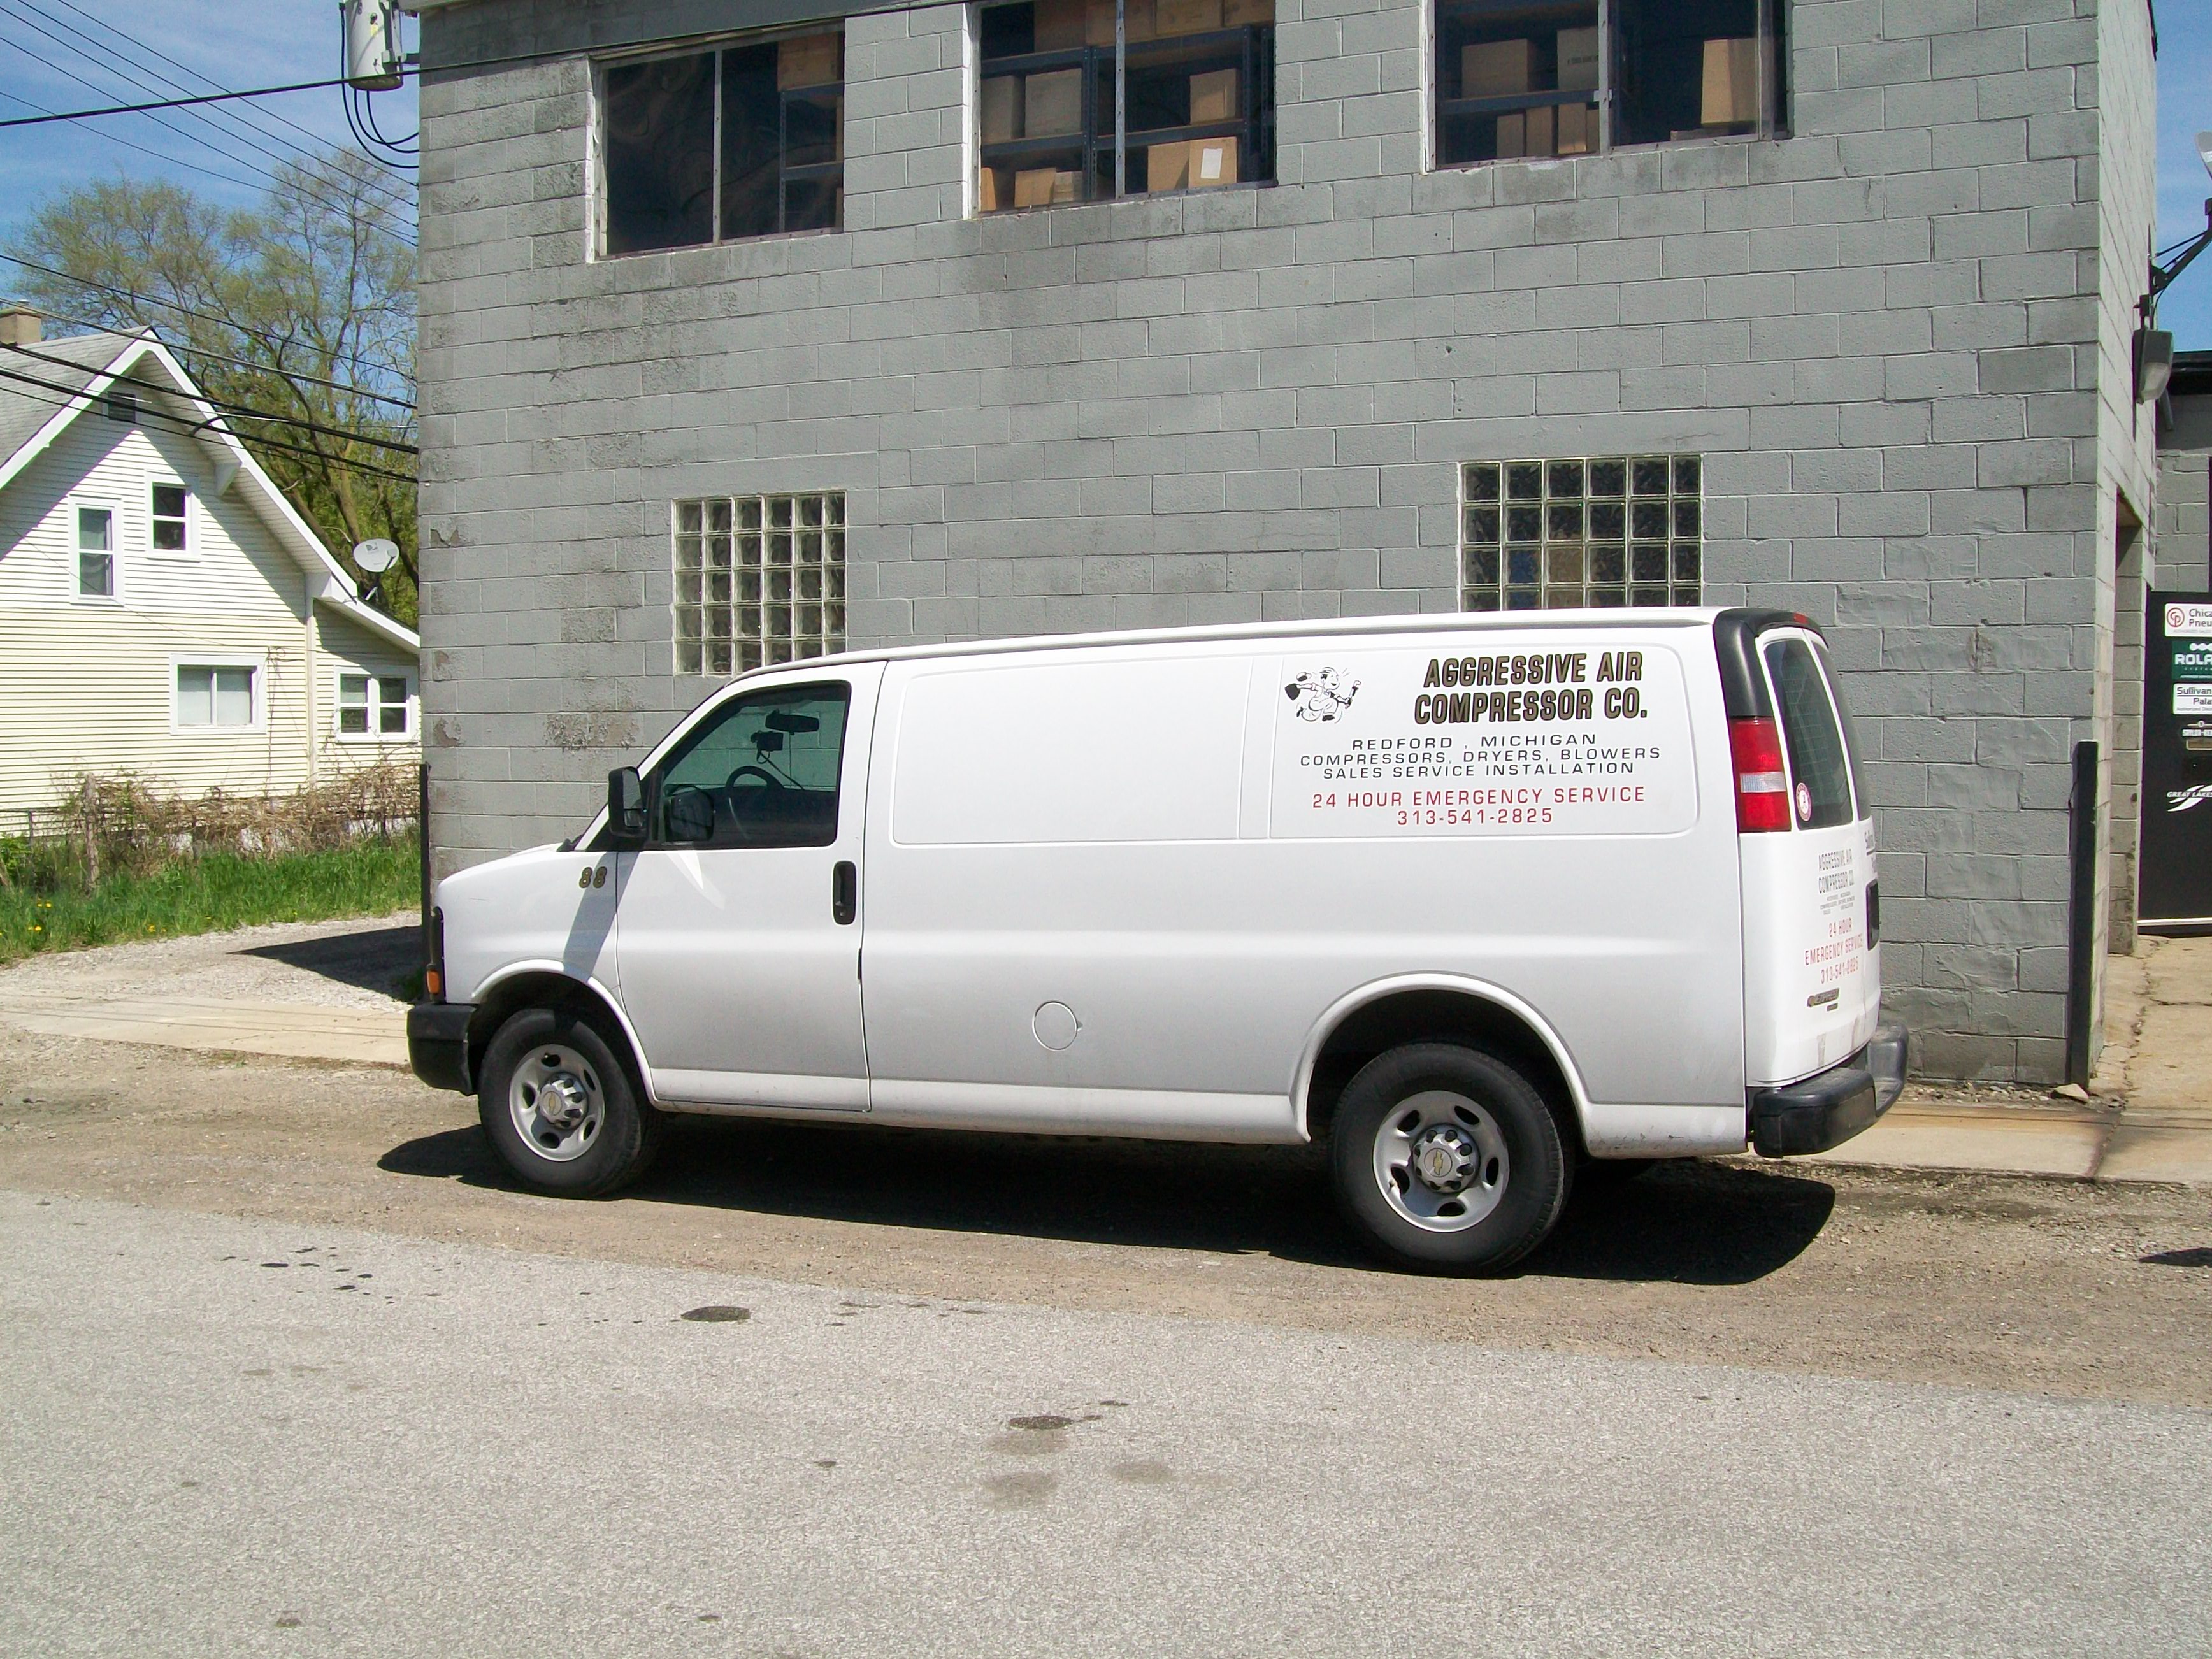 aggressive air compressor co 24 hour emergency service vehicle